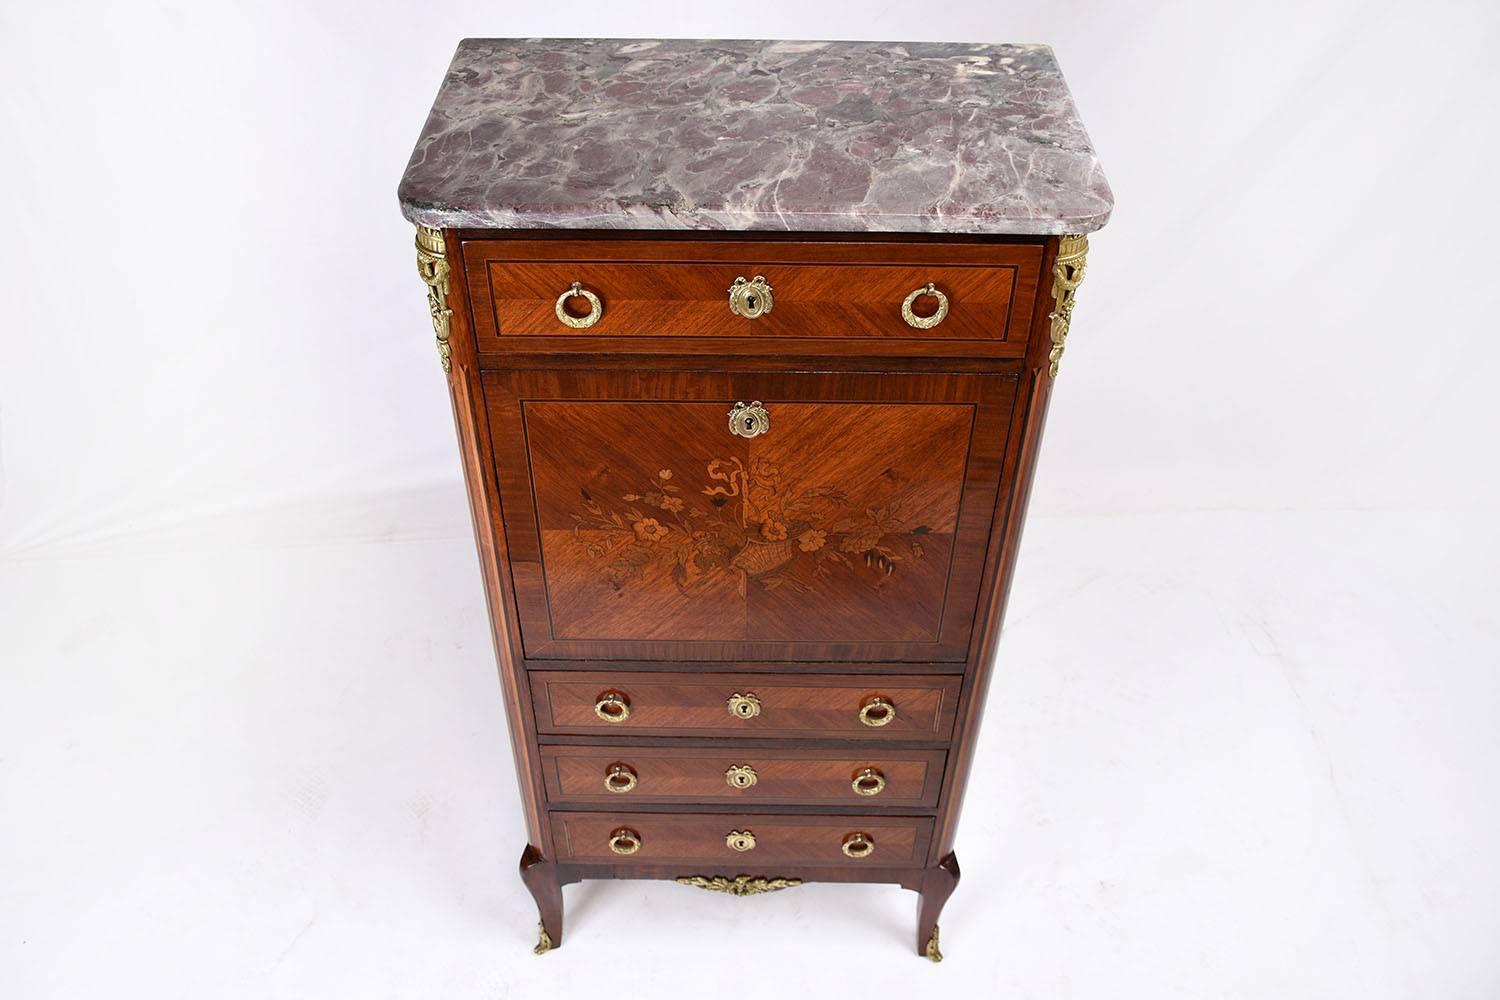 This 1890s Antique French Louis XVI-style secretaire is made from mahogany wood that has been stained in a rich medium wood tone color with marquetry details. Adorning the facade of the drop down door is an inlaid marquetry detail of a basket of